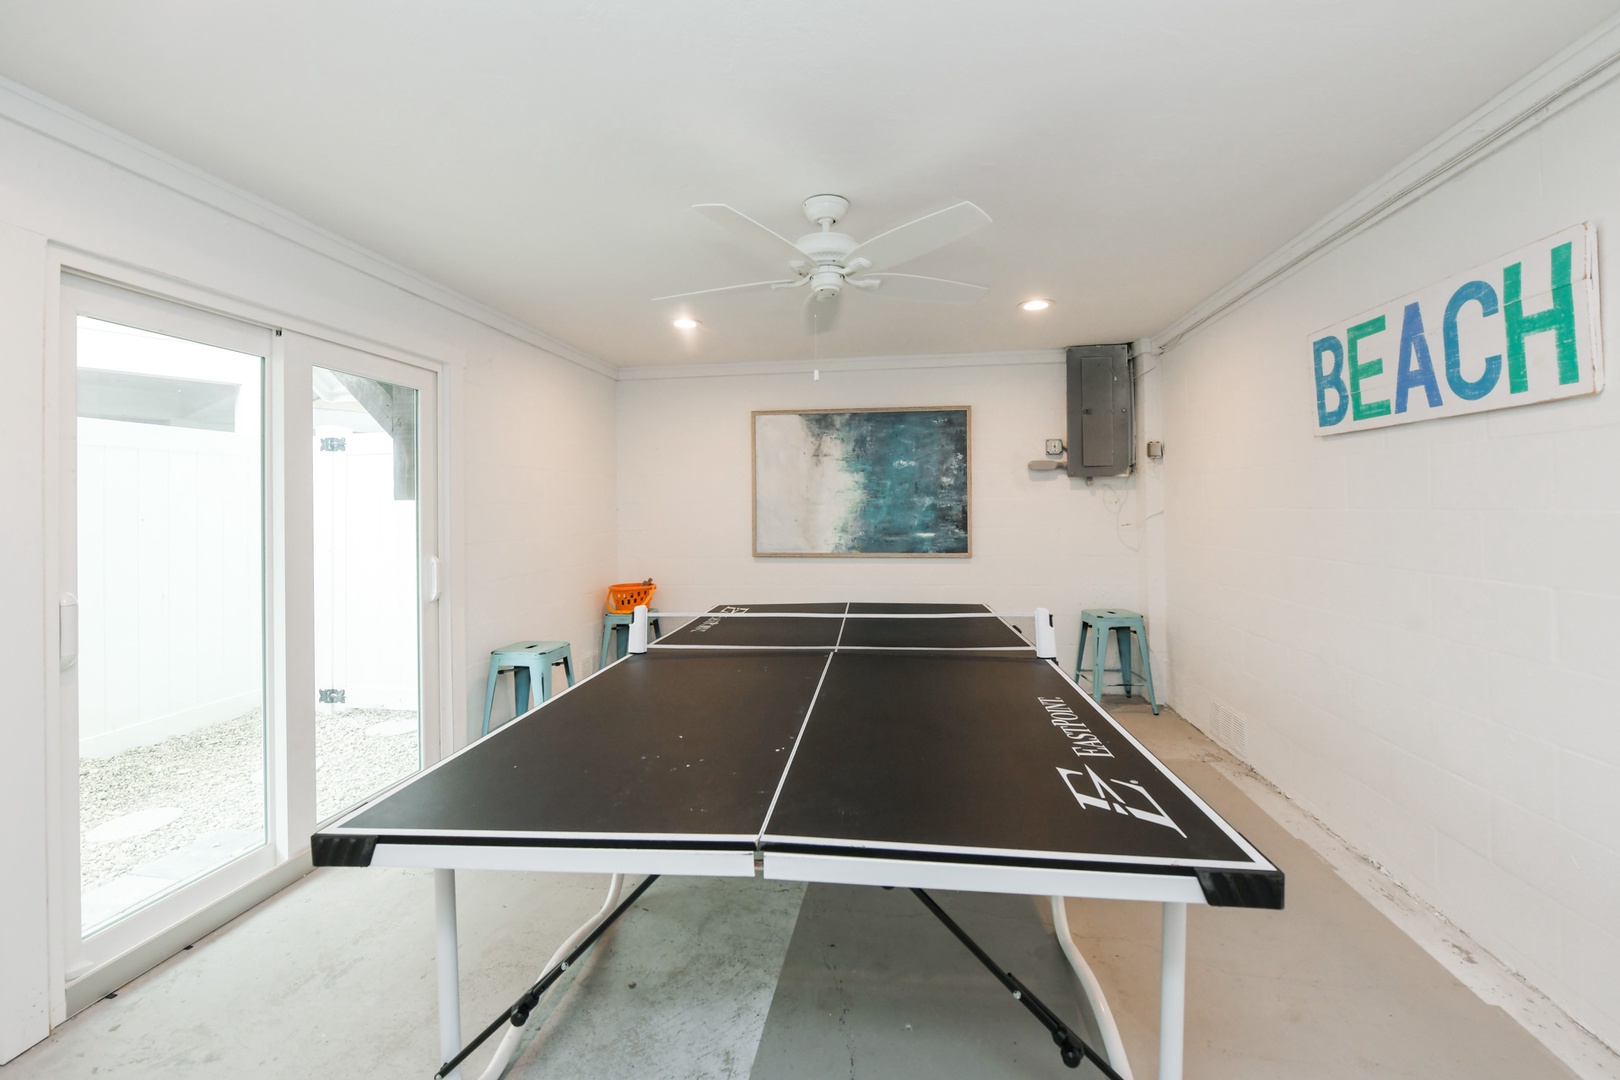 Game Room - Foosball and Ping Pong